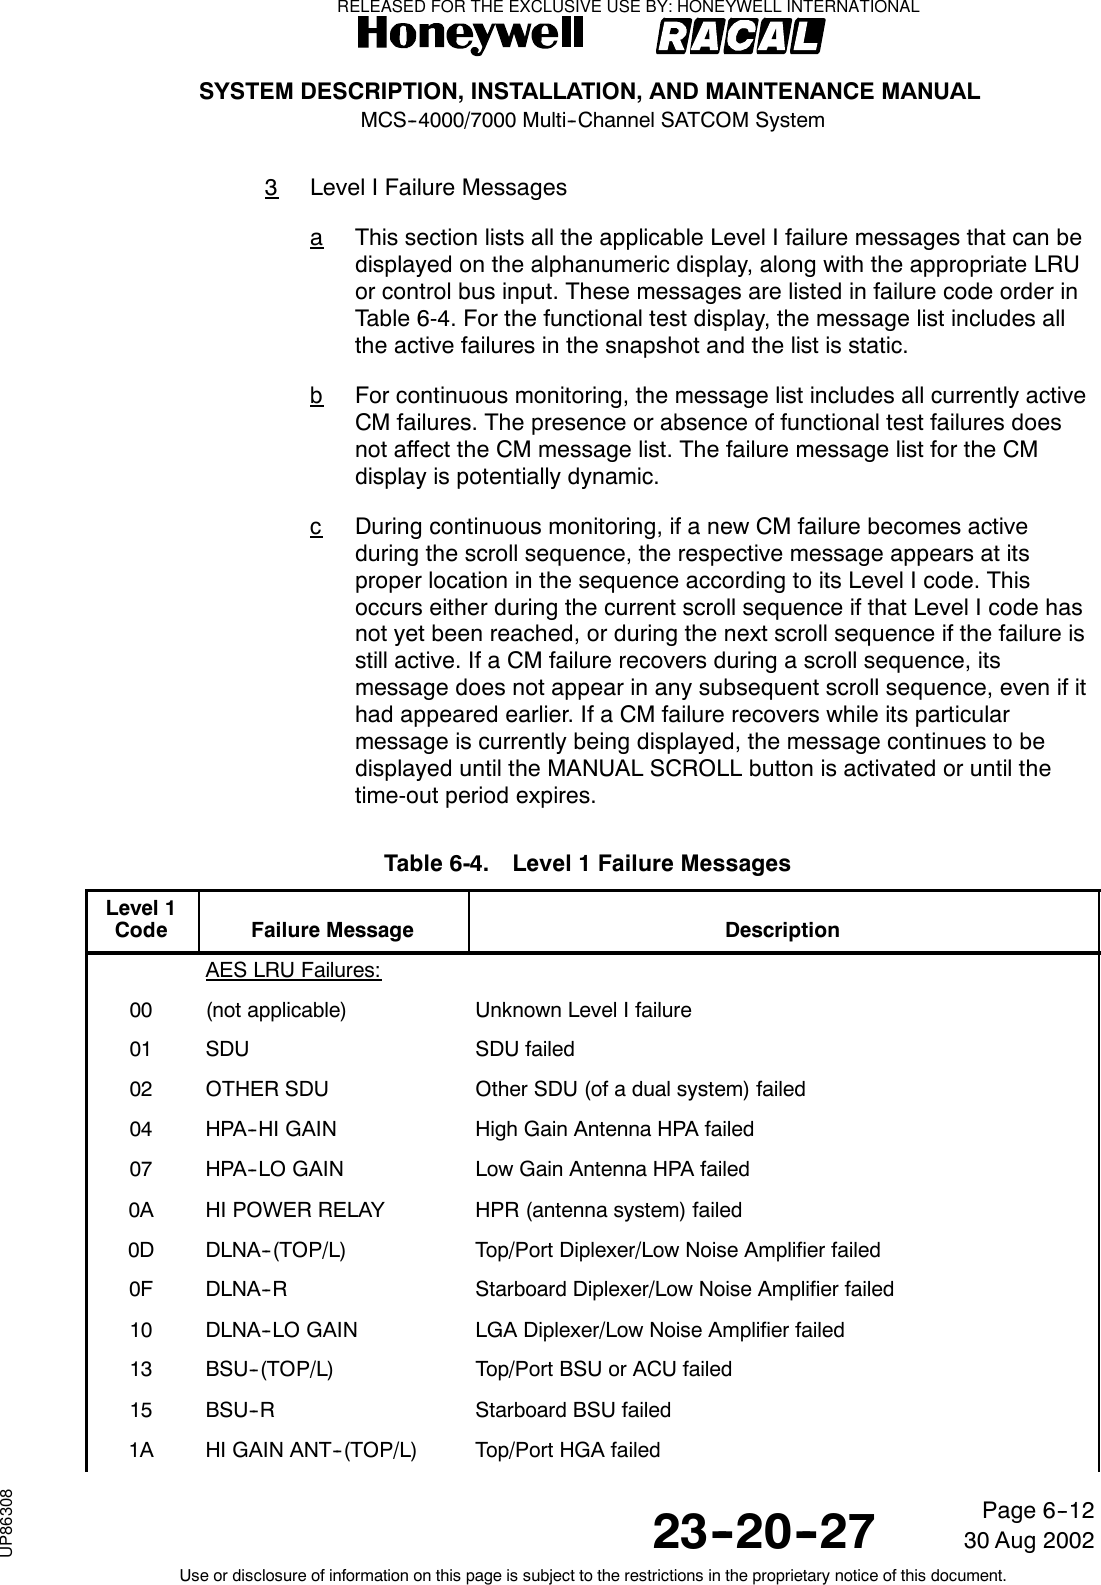 SYSTEM DESCRIPTION, INSTALLATION, AND MAINTENANCE MANUALMCS--4000/7000 Multi--Channel SATCOM System23--20--2730 Aug 2002Use or disclosure of information on this page is subject to the restrictions in the proprietary notice of this document.Page 6--123Level I Failure MessagesaThis section lists all the applicable Level I failure messages that can bedisplayed on the alphanumeric display, along with the appropriate LRUor control bus input. These messages are listed in failure code order inTable 6-4. For the functional test display, the message list includes allthe active failures in the snapshot and the list is static.bFor continuous monitoring, the message list includes all currently activeCM failures. The presence or absence of functional test failures doesnot affect the CM message list. The failure message list for the CMdisplay is potentially dynamic.cDuring continuous monitoring, if a new CM failure becomes activeduring the scroll sequence, the respective message appears at itsproper location in the sequence according to its Level I code. Thisoccurs either during the current scroll sequence if that Level I code hasnot yet been reached, or during the next scroll sequence if the failure isstill active. If a CM failure recovers during a scroll sequence, itsmessage does not appear in any subsequent scroll sequence, even if ithad appeared earlier. If a CM failure recovers while its particularmessage is currently being displayed, the message continues to bedisplayed until the MANUAL SCROLL button is activated or until thetime-out period expires.Table 6-4. Level 1 Failure MessagesLevel 1Code Failure Message DescriptionAES LRU Failures:00 (not applicable) Unknown Level I failure01 SDU SDU failed02 OTHER SDU Other SDU (of a dual system) failed04 HPA--HI GAIN High Gain Antenna HPA failed07 HPA--LO GAIN Low Gain Antenna HPA failed0A HI POWER RELAY HPR (antenna system) failed0D DLNA--(TOP/L) Top/Port Diplexer/Low Noise Amplifier failed0F DLNA--R Starboard Diplexer/Low Noise Amplifier failed10 DLNA--LO GAIN LGA Diplexer/Low Noise Amplifier failed13 BSU--(TOP/L) Top/Port BSU or ACU failed15 BSU--R Starboard BSU failed1A HI GAIN ANT--(TOP/L) Top/Port HGA failedRELEASED FOR THE EXCLUSIVE USE BY: HONEYWELL INTERNATIONALUP86308